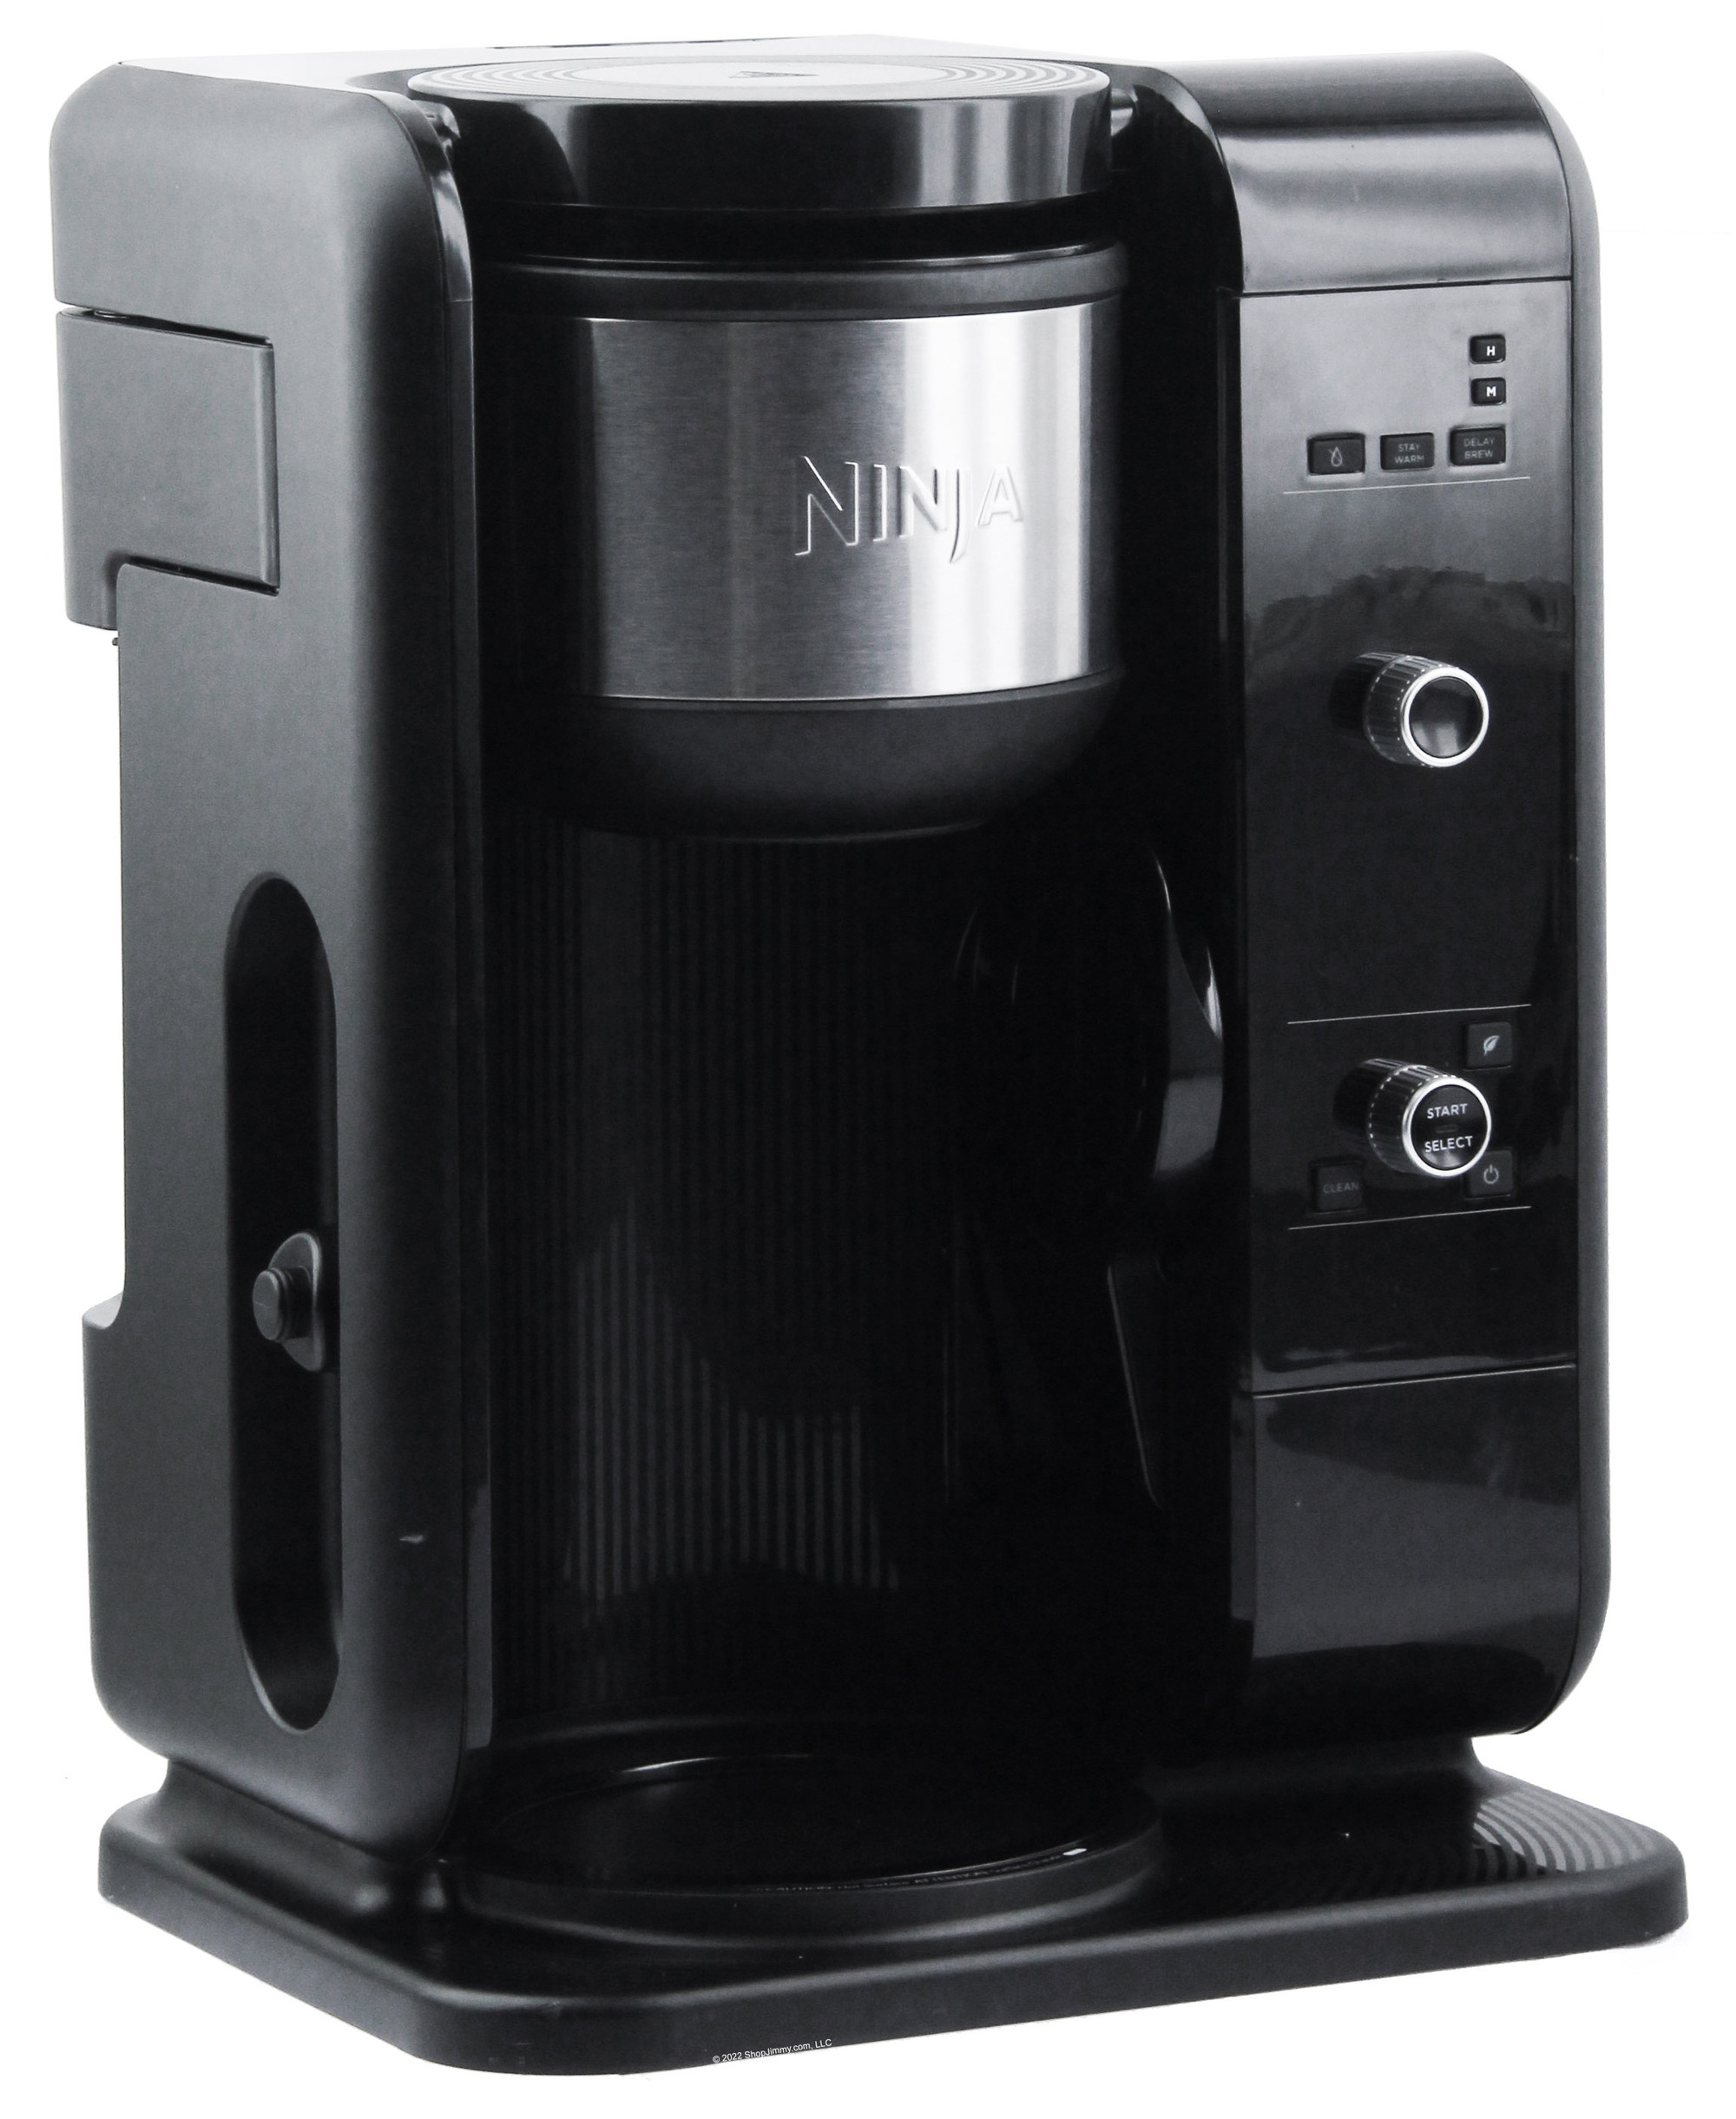 Ninja CP301 Coffee Maker Review: The Perfect Cup Every Time? 